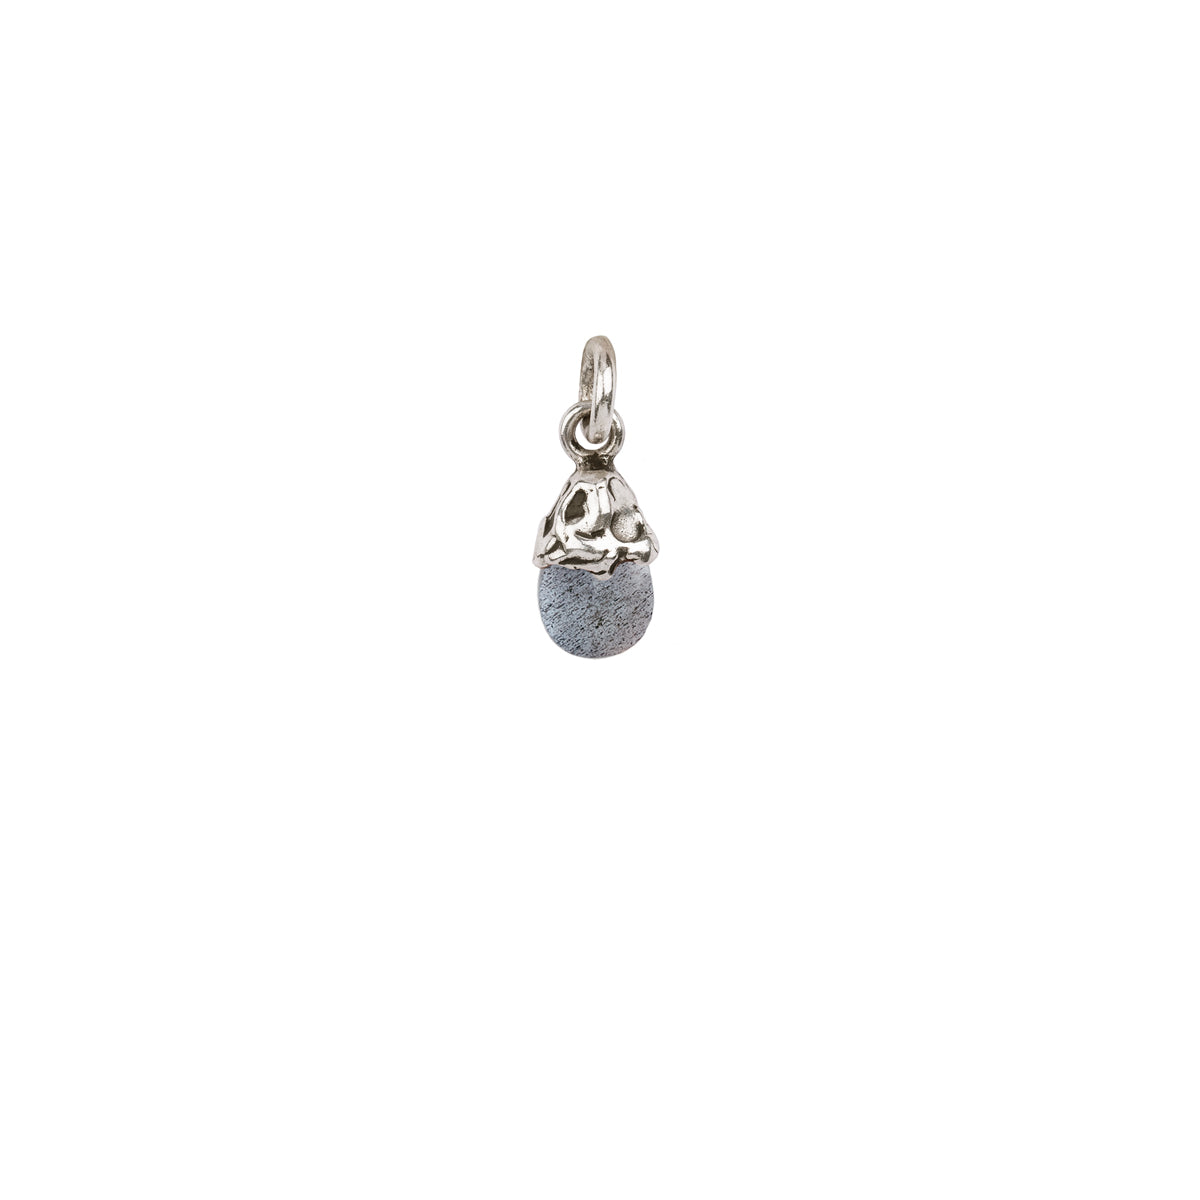 A sterling silver attraction charm capped with a Labradorite stone.